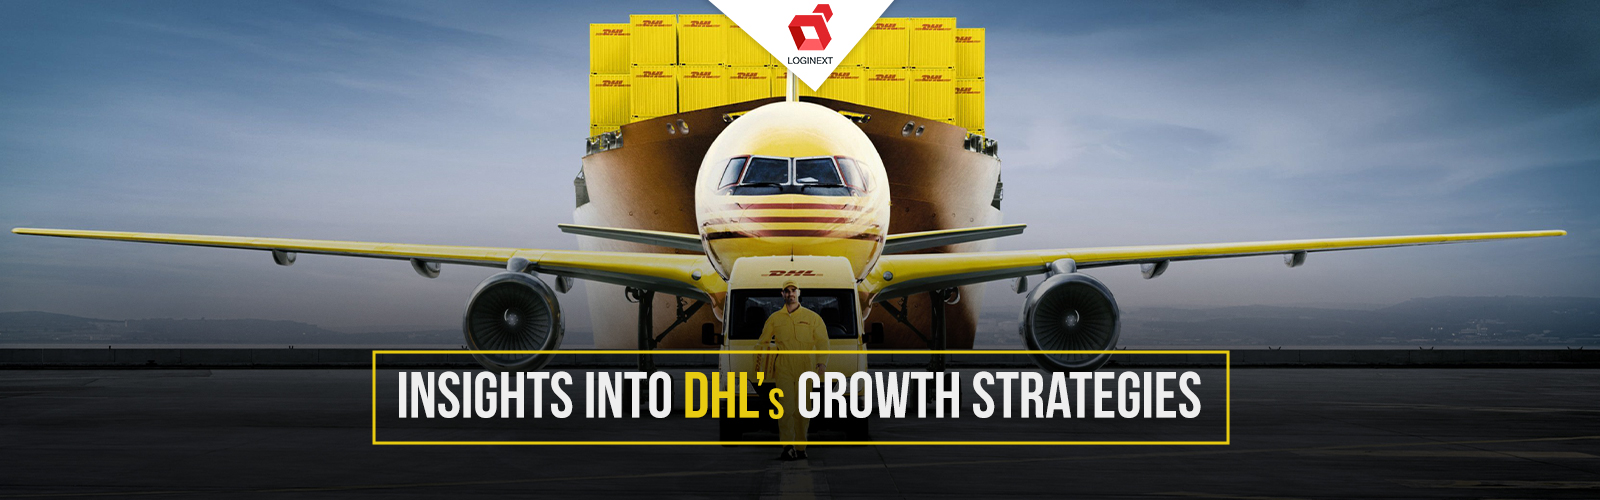 Insights Into DHL’s Growth Strategies